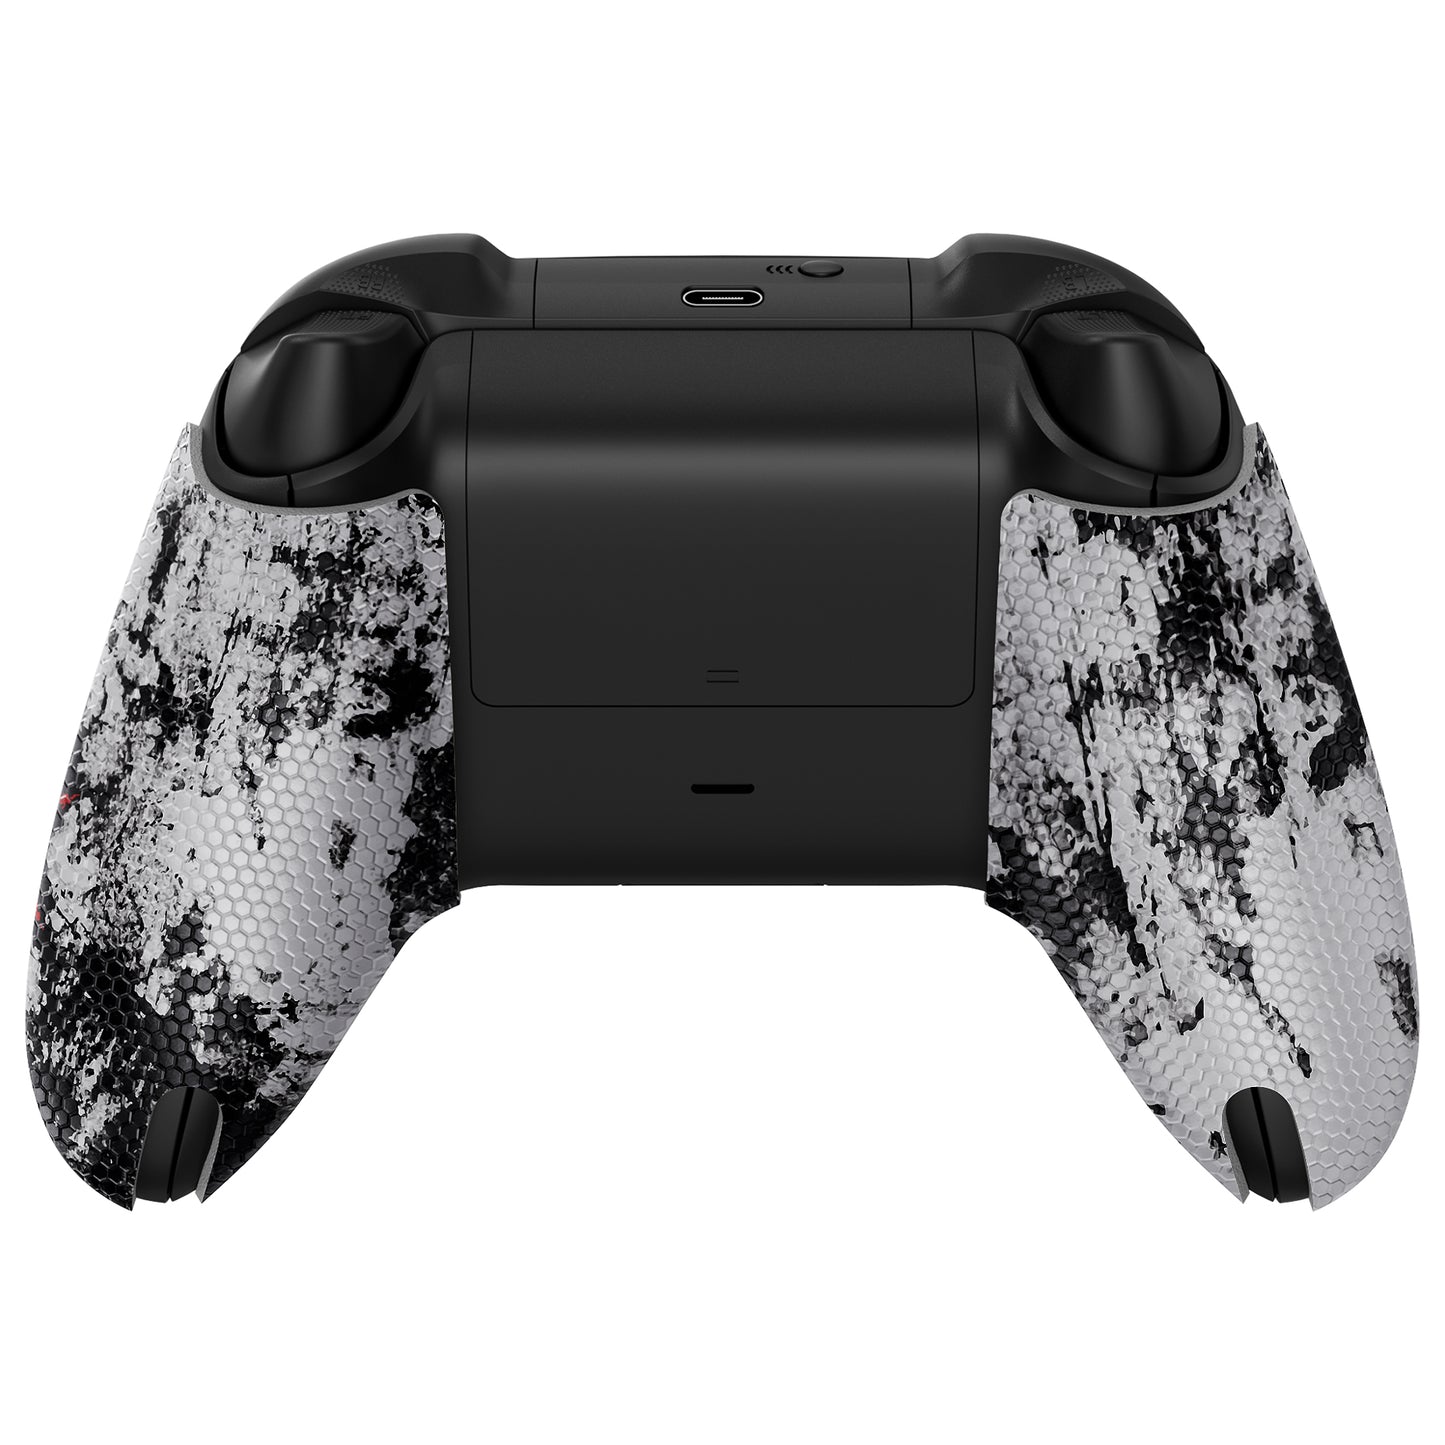 PlayVital Anti-Skid Sweat-Absorbent Controller Grip for Xbox Series X/S Controller, Professional Textured Soft Rubber Pads Handle Grips for Xbox Core Wireless Controller - Biohazard - X3PJ042 PlayVital